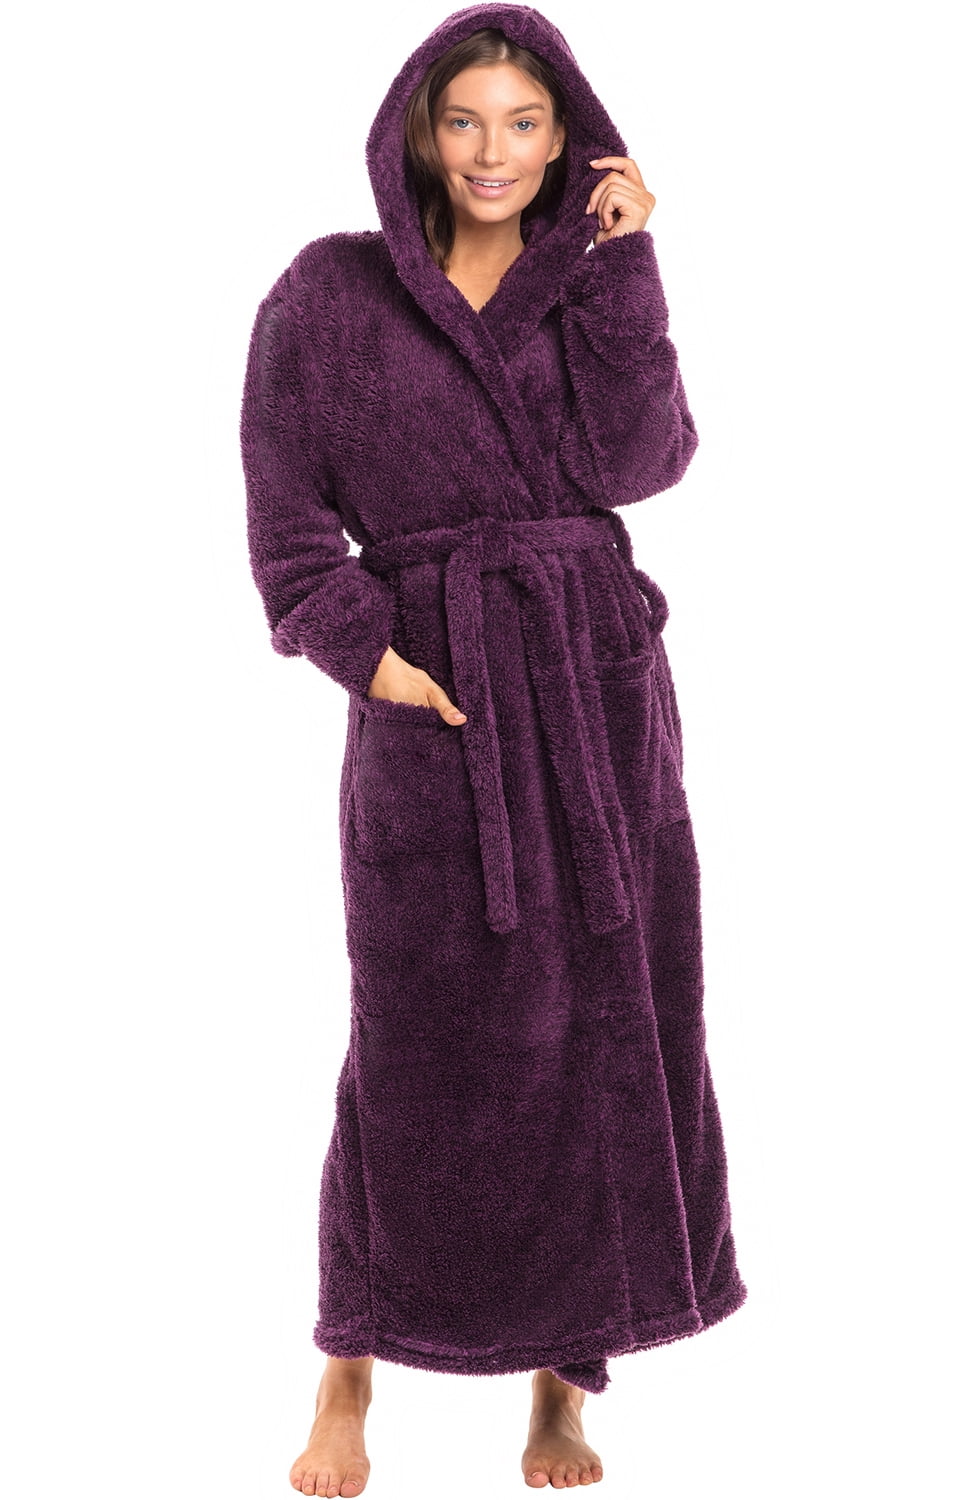 Plush Fleece Hooded Bathrobe with Two Large Front Pockets Alexander Del Rossa Women’s Robe 